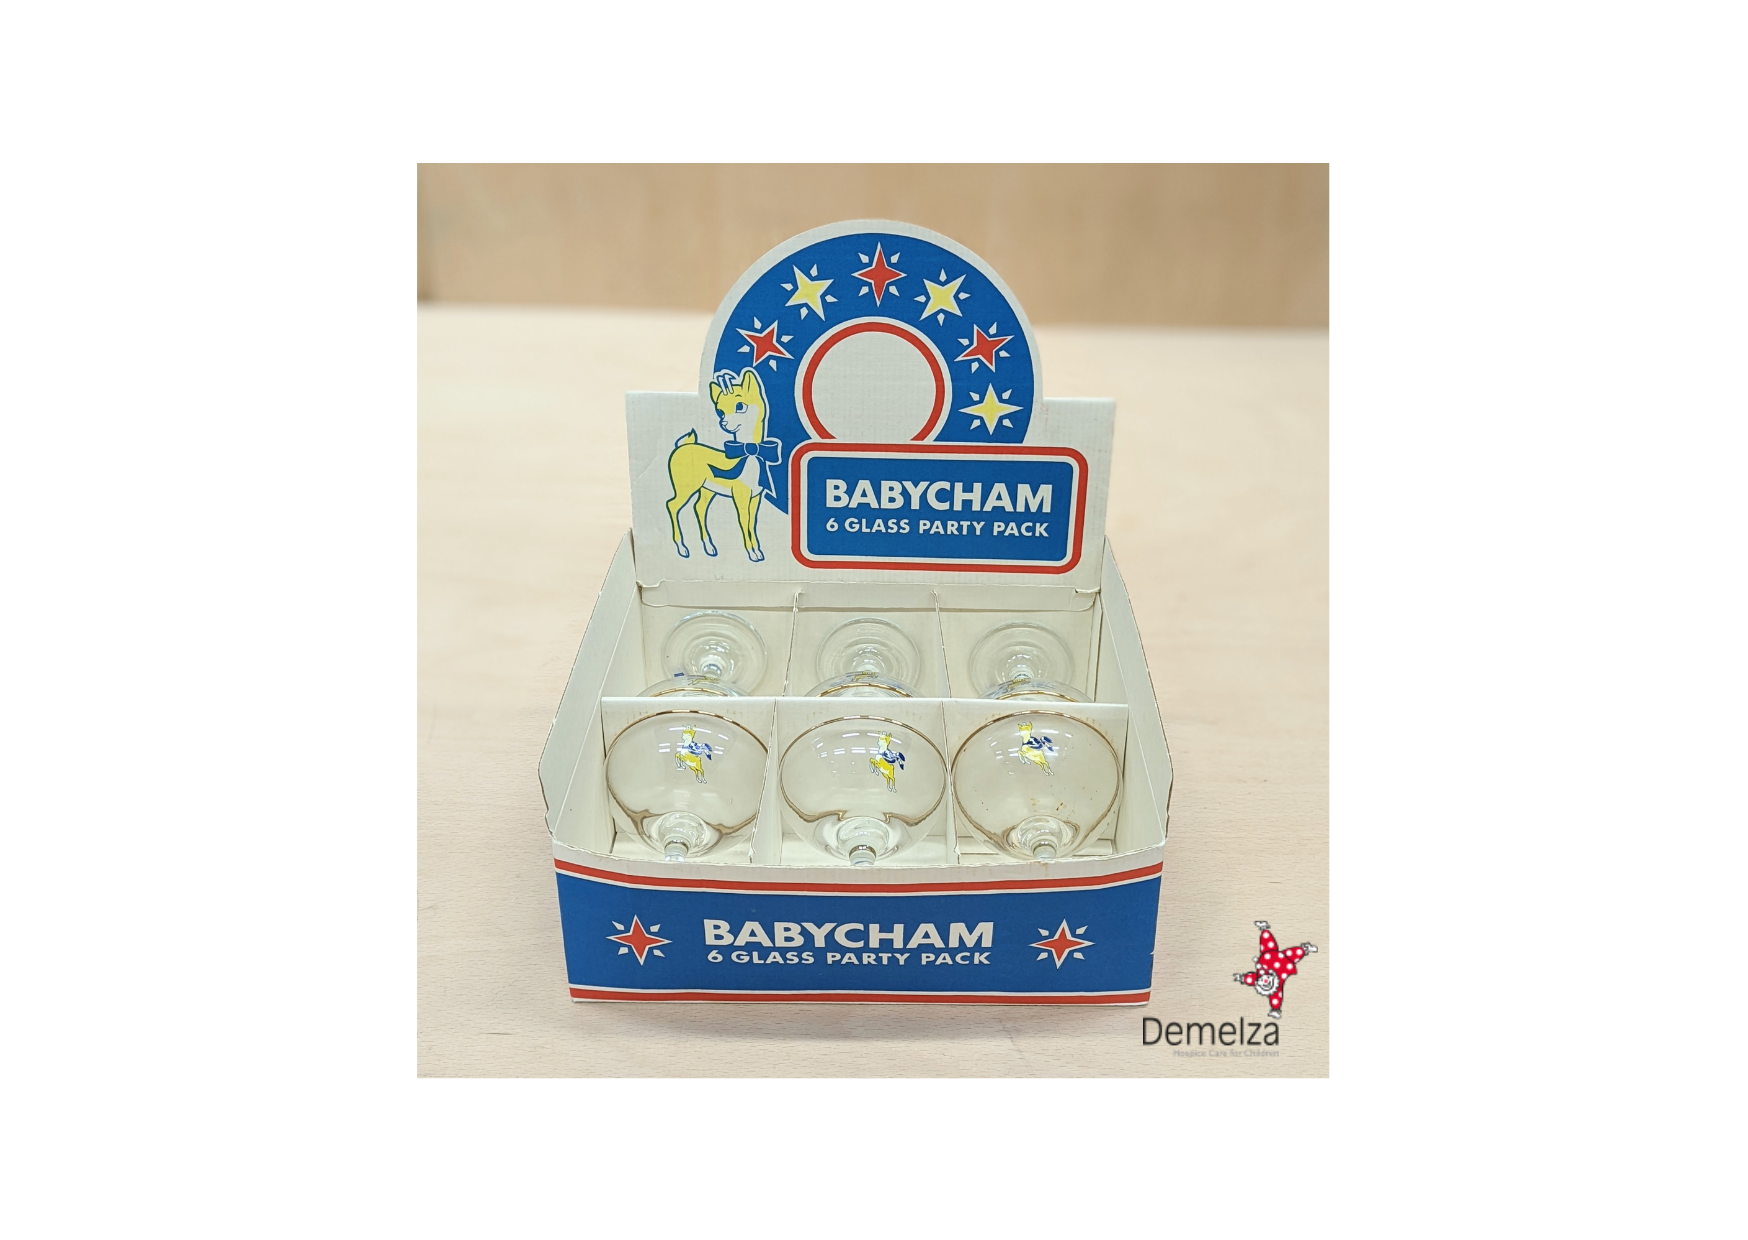 Six Babycham Clear Glasses with Babycham Deer Logo and Text with Original Box 